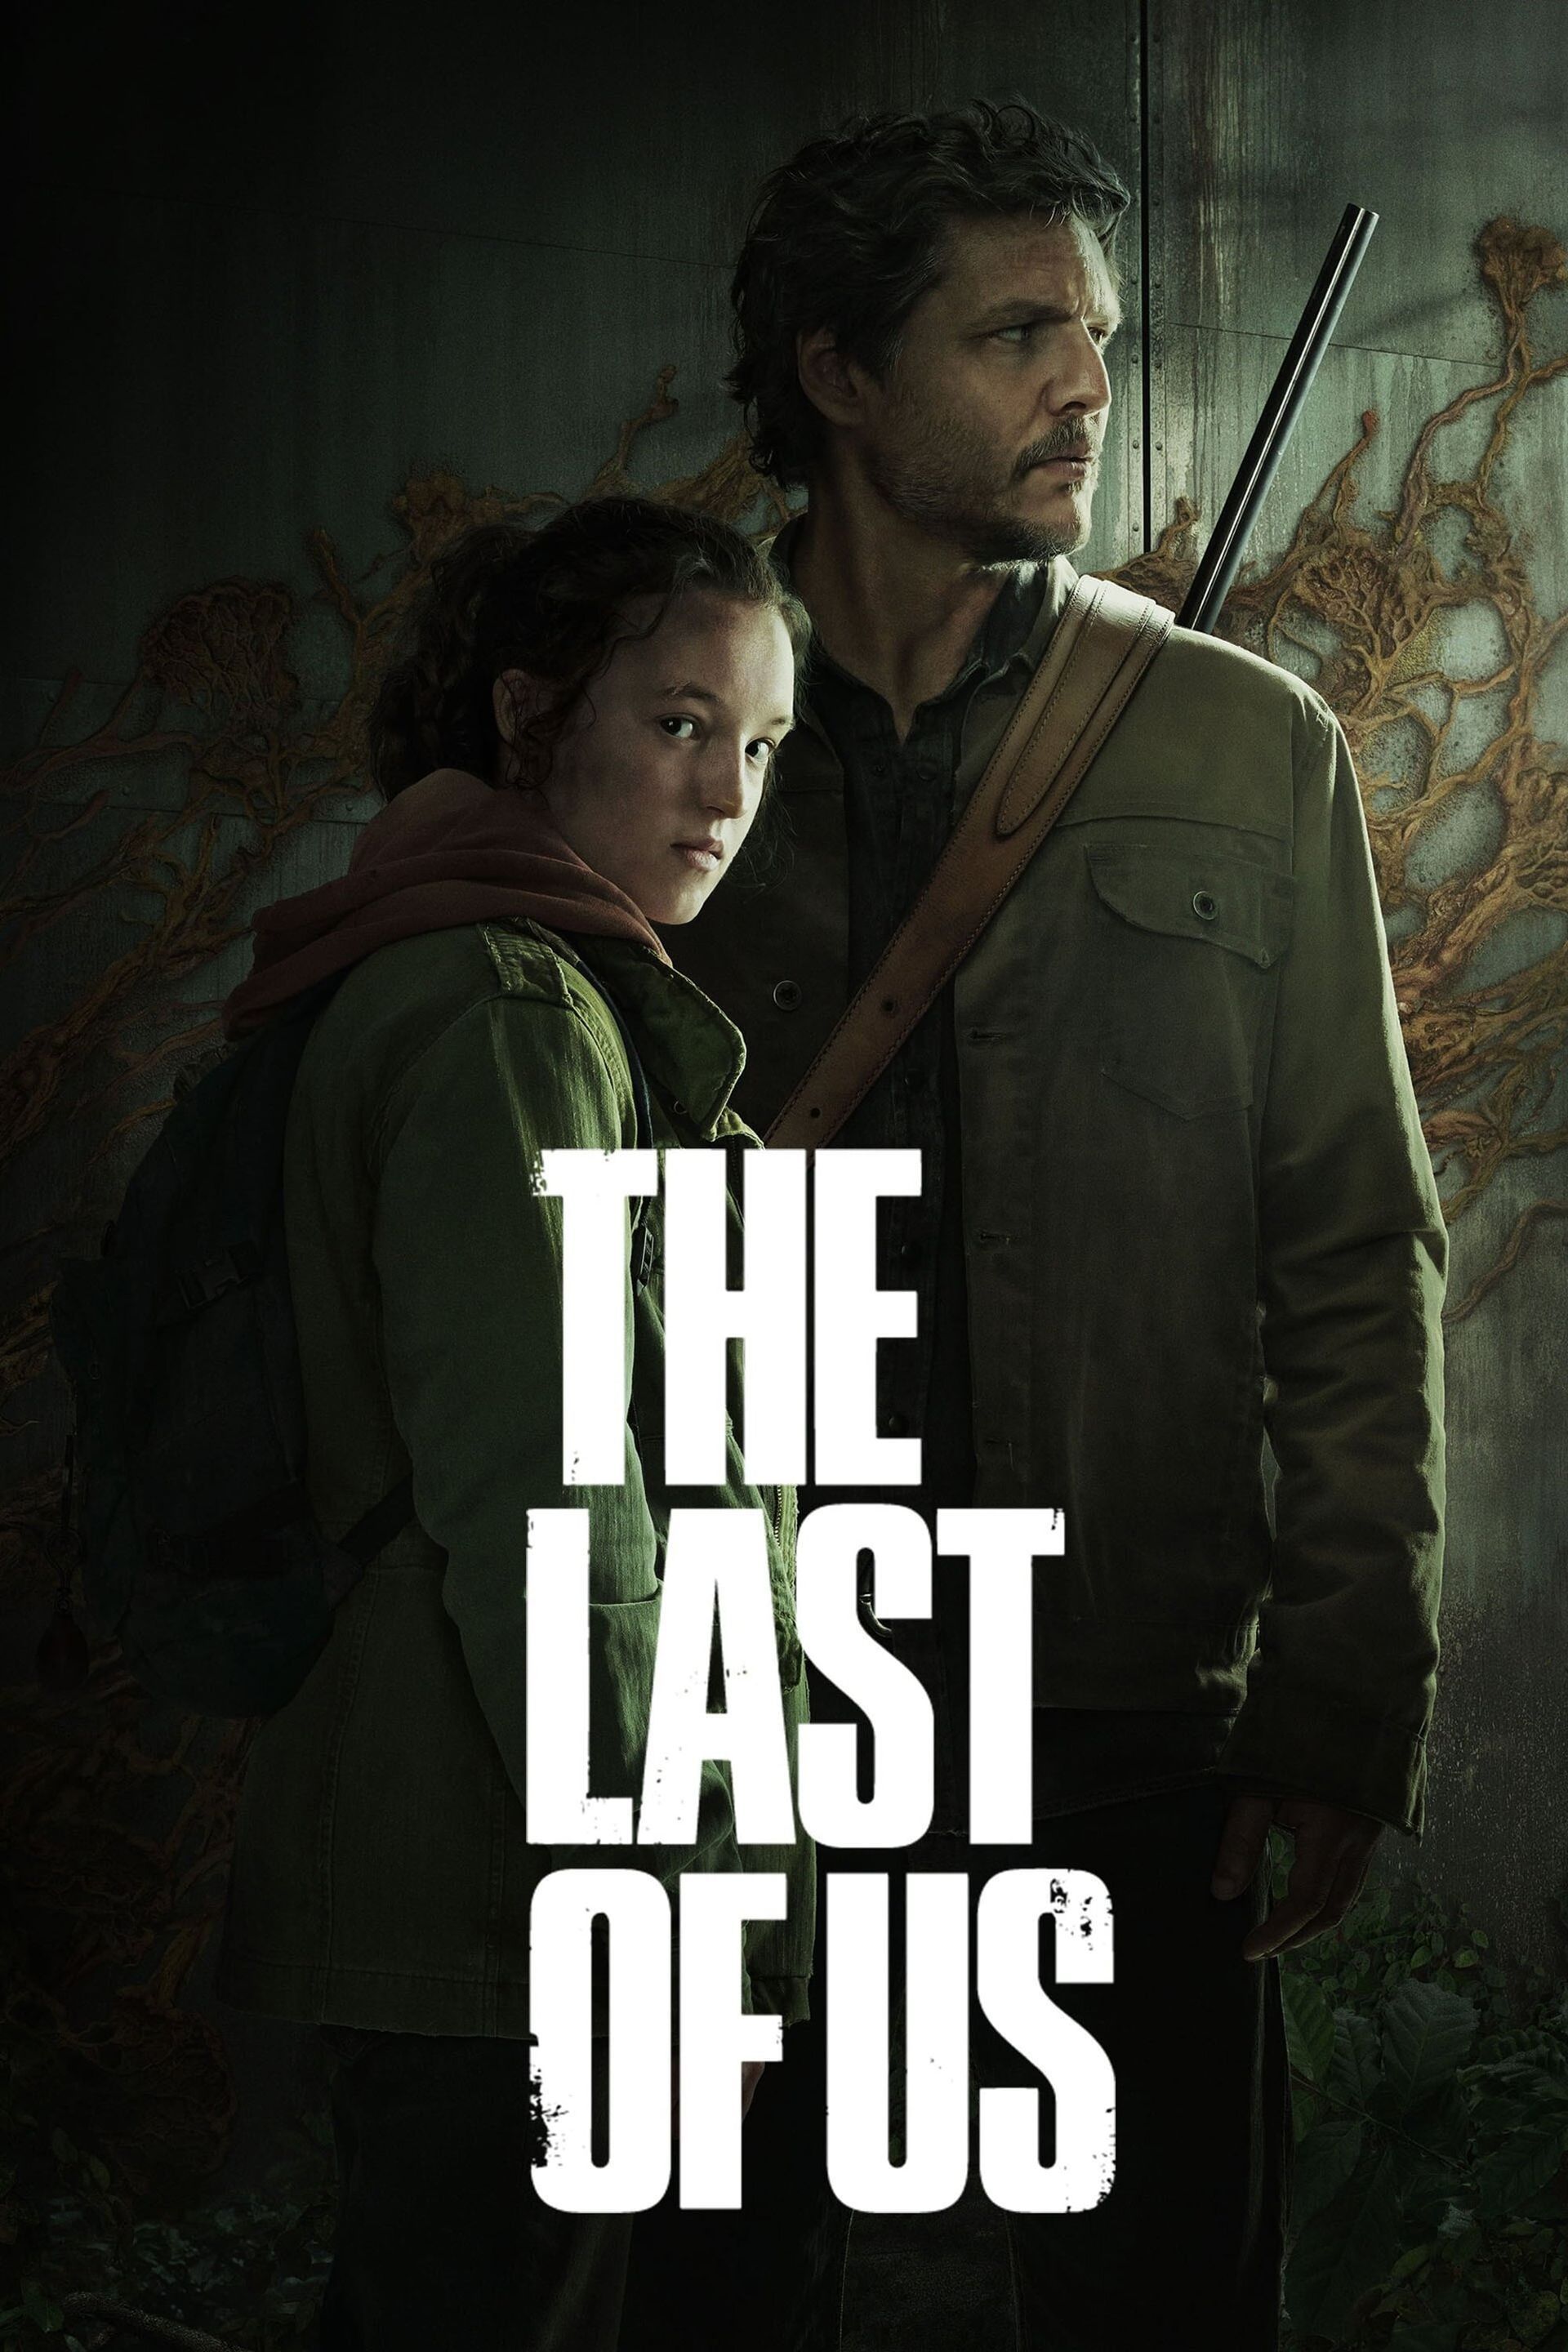 Watch Making Of: The Last of Us Online Streaming